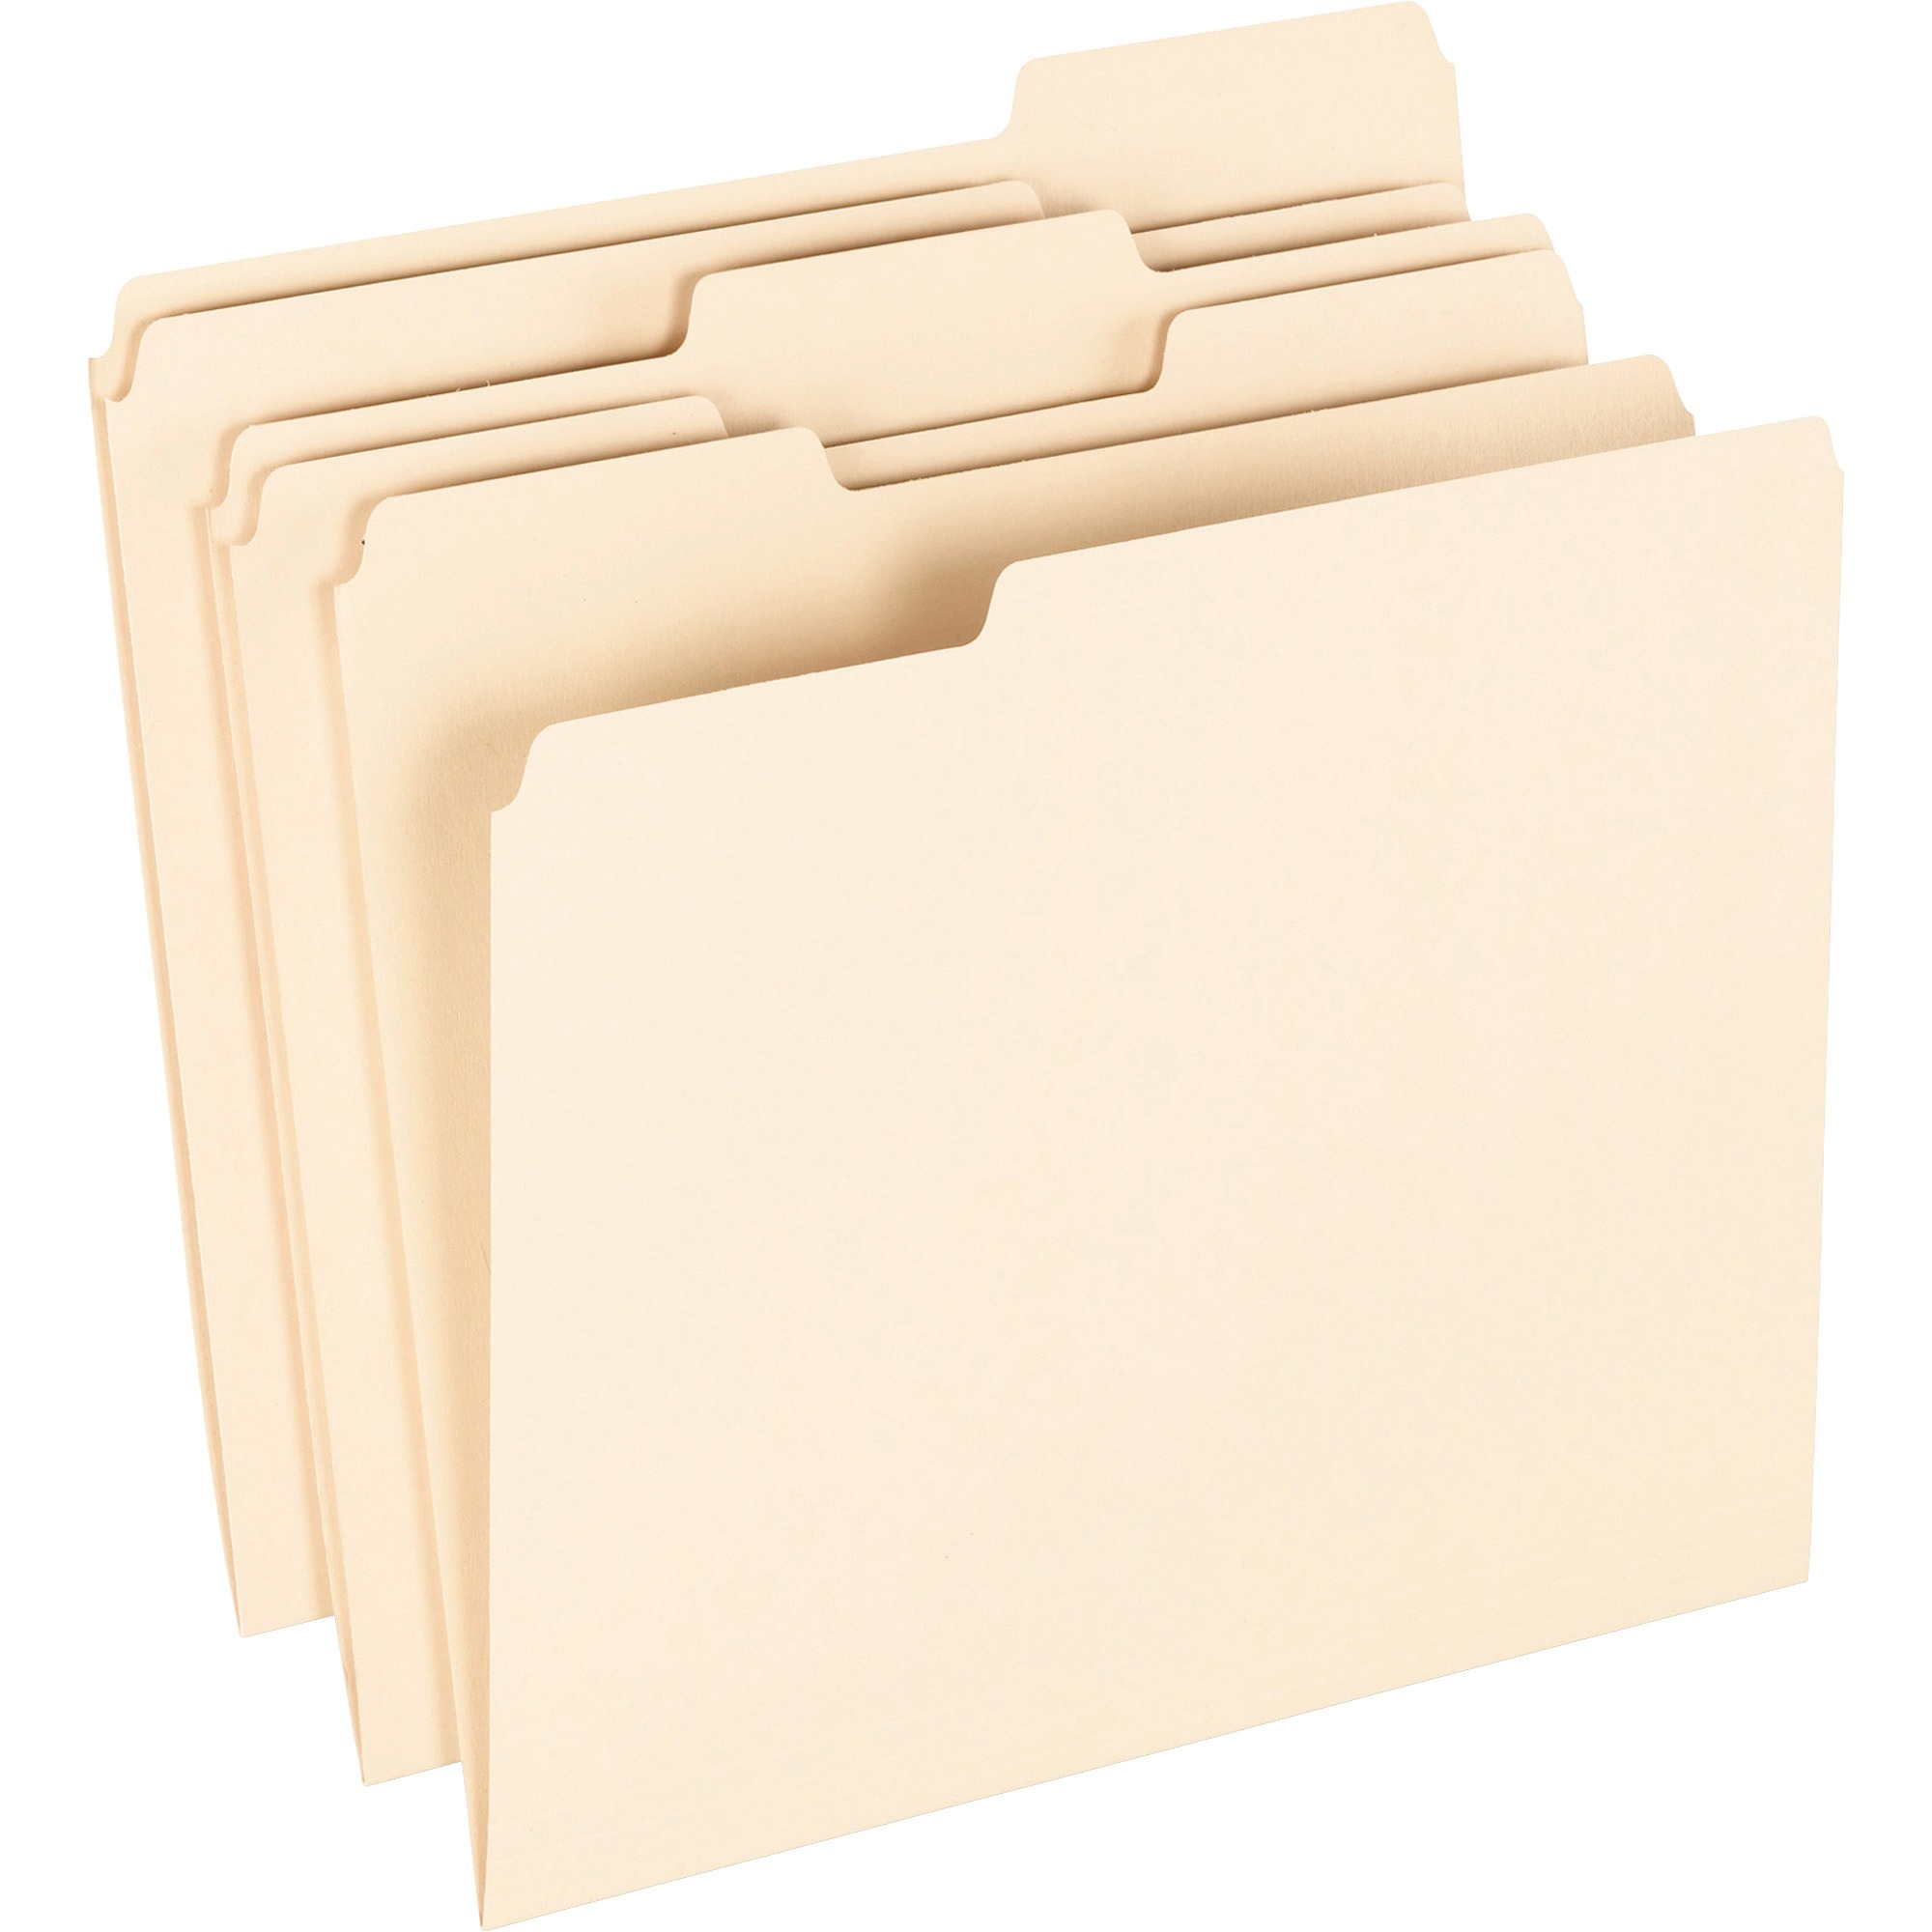 Earthwise 100% Recycled Paper File Folder, 1/3 Cut, Letter, Manila, 100/Box